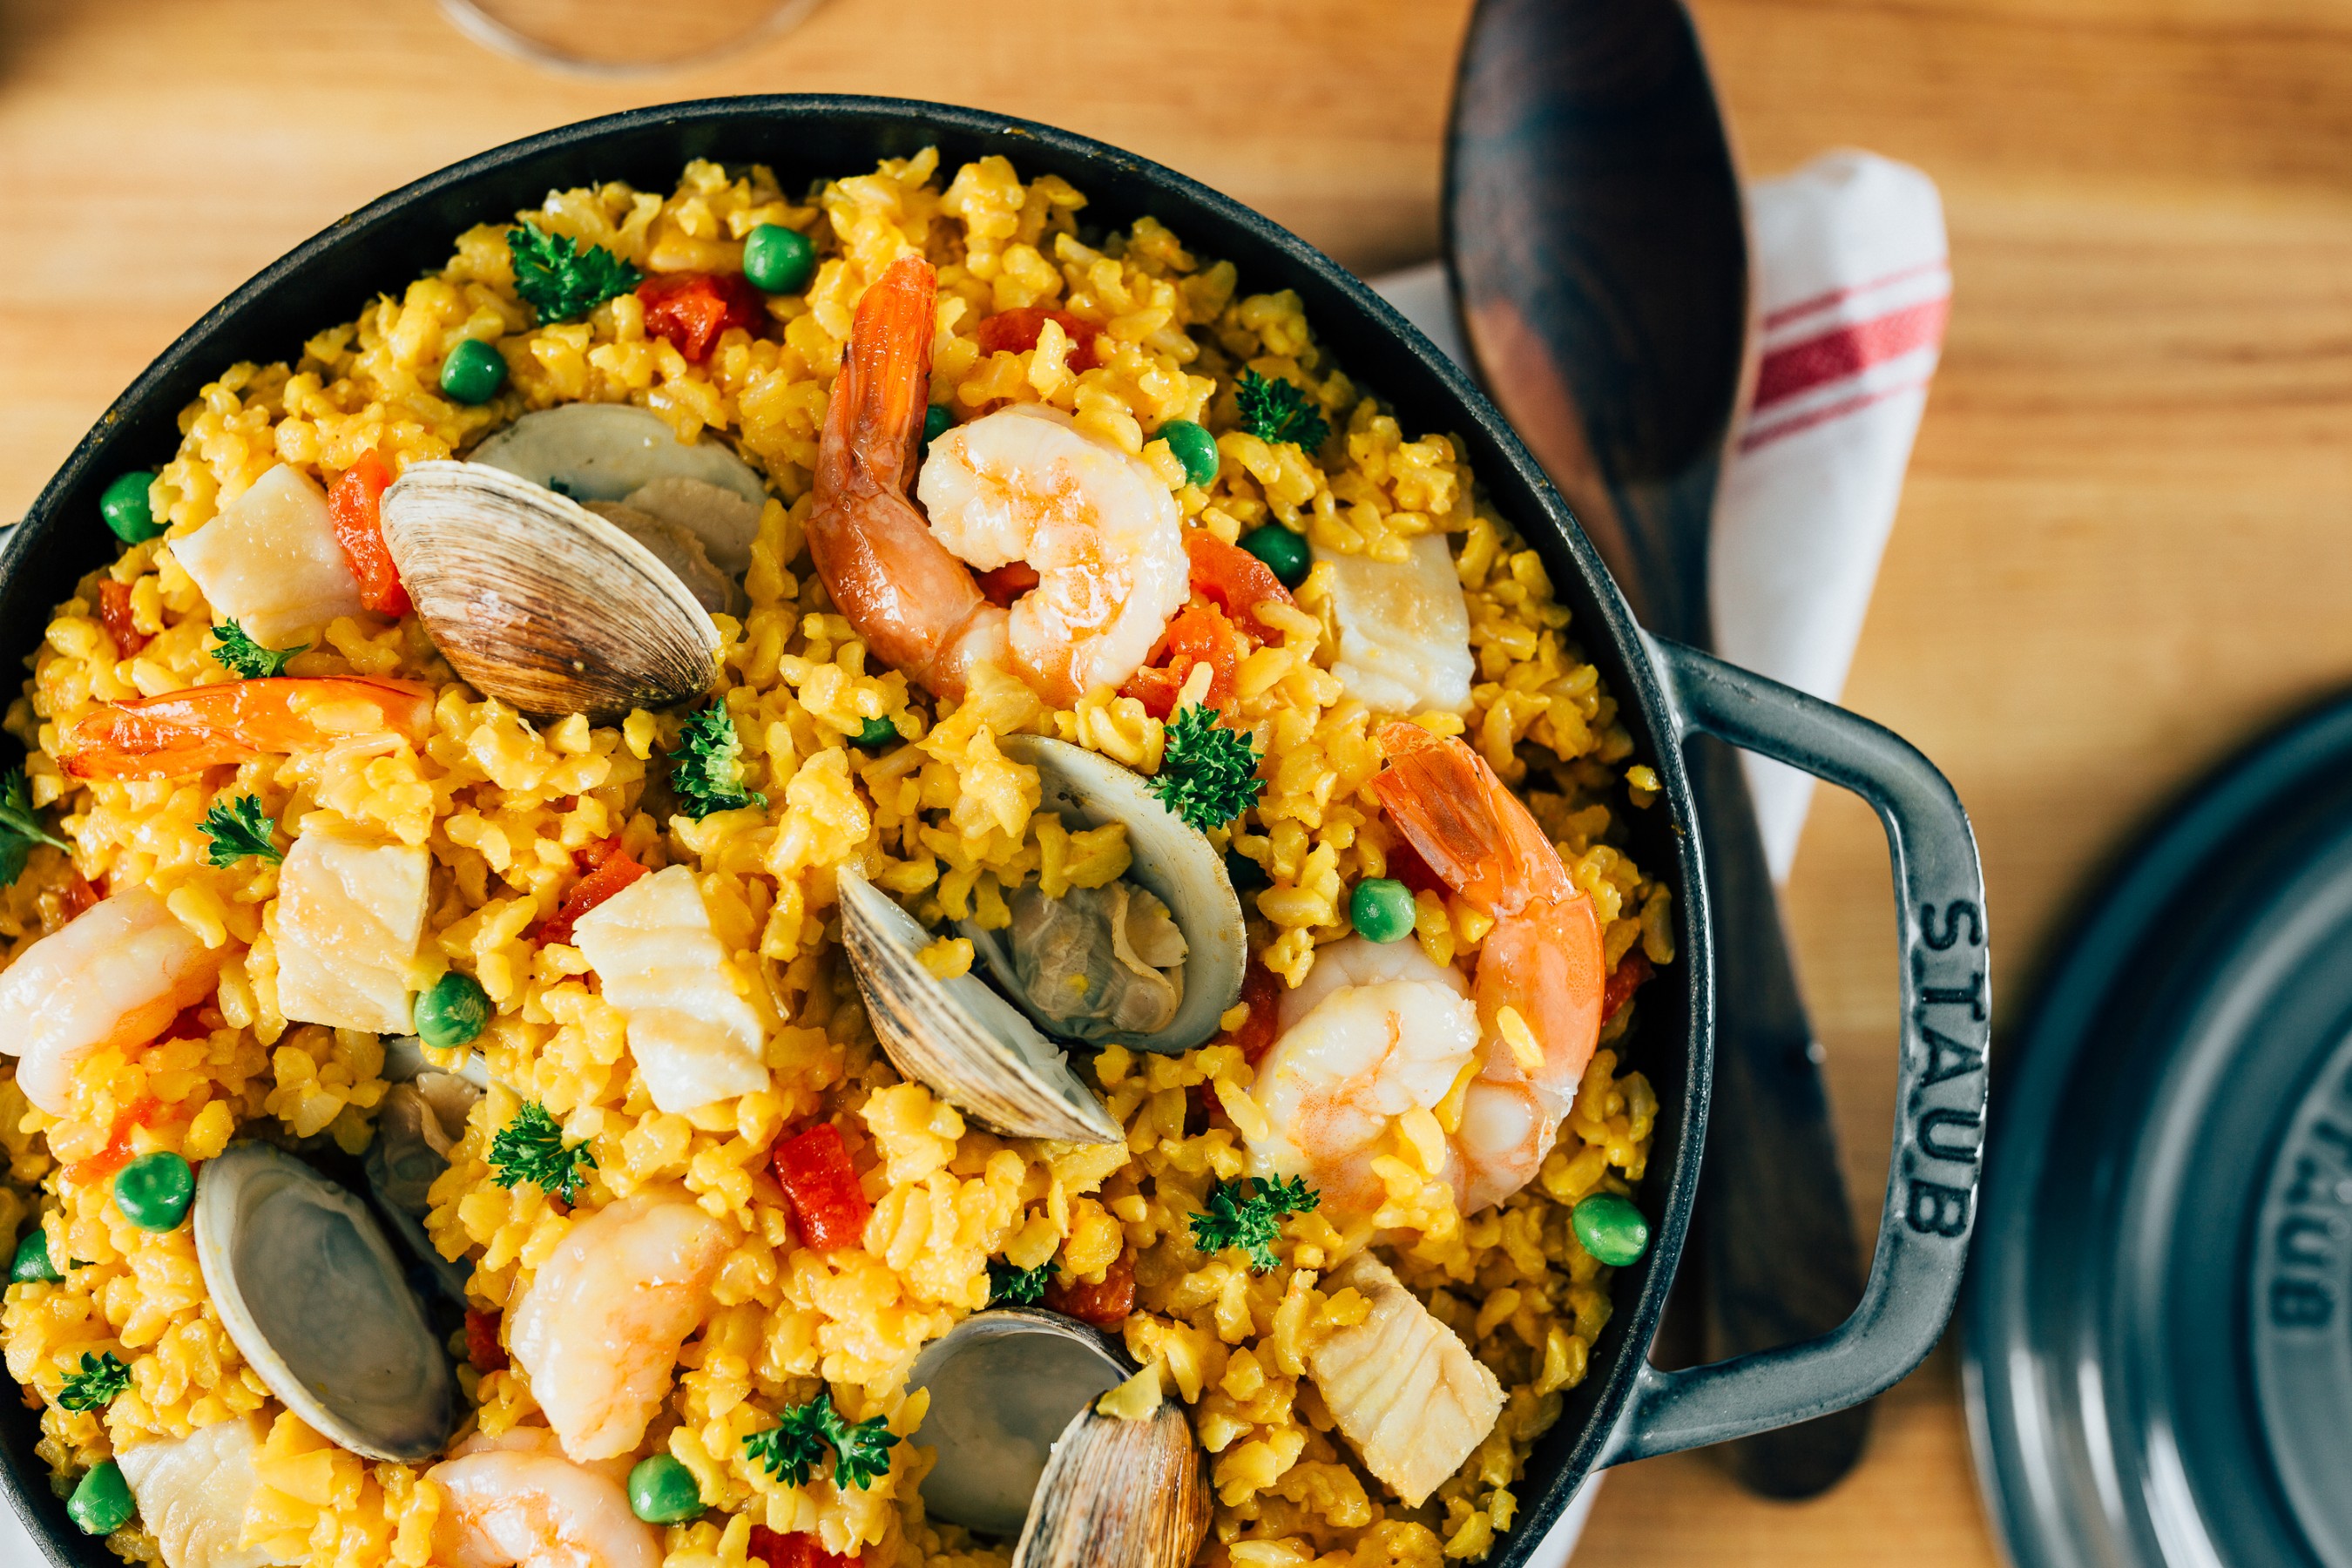 Go Pescatarian with this delicious seafood paella recipe featured in our e-cookbook!